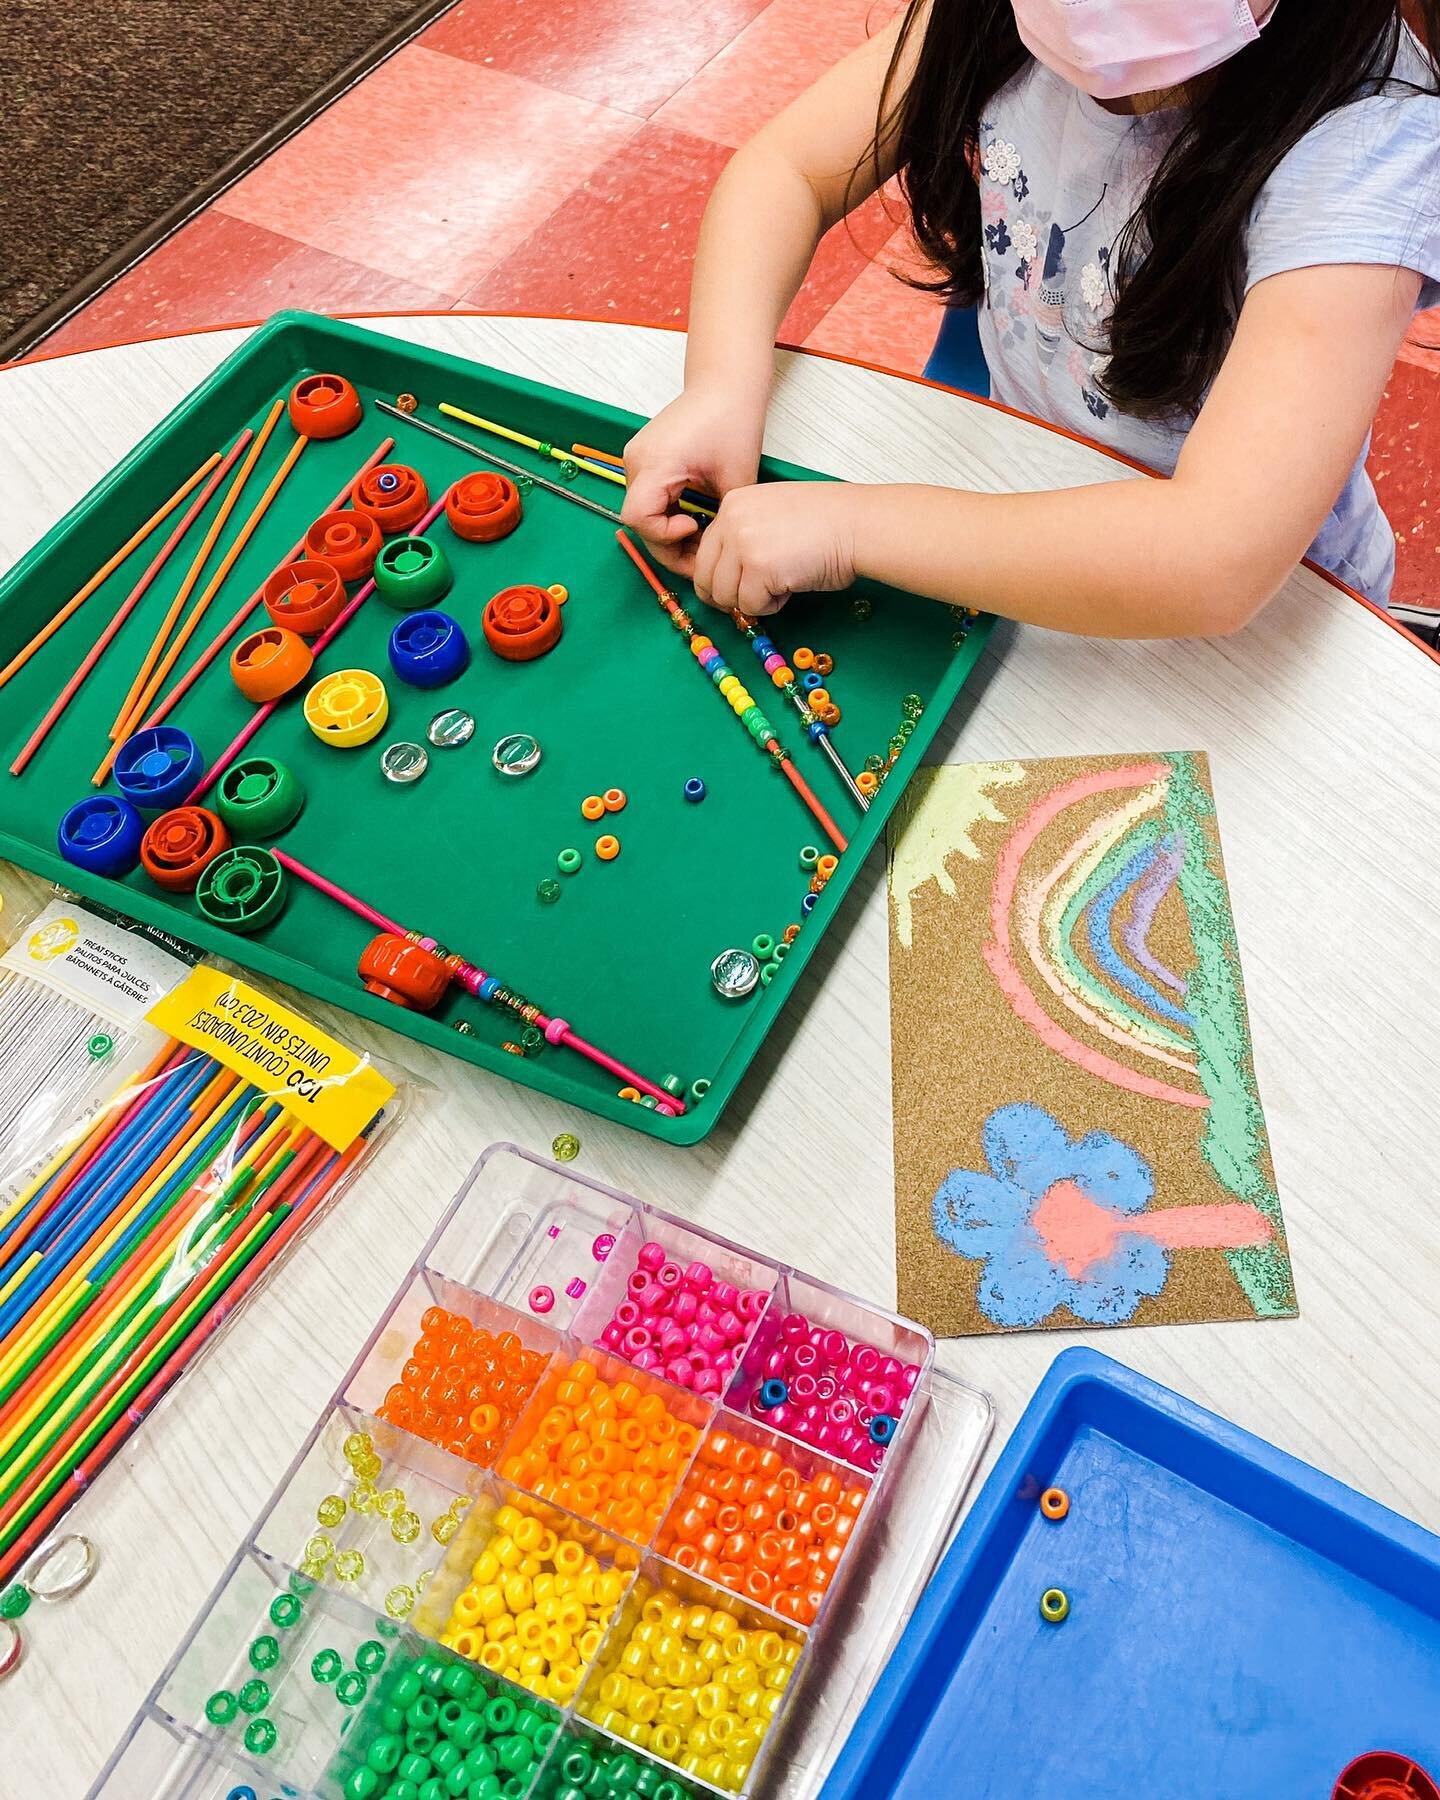 Loose parts art! We love letting our imaginations run while we develop our problem solving and reasoning skills.

Image Description: A student sits at a table with a green tray filled with colorful sticks, caps, beads and stones. At the front of the 